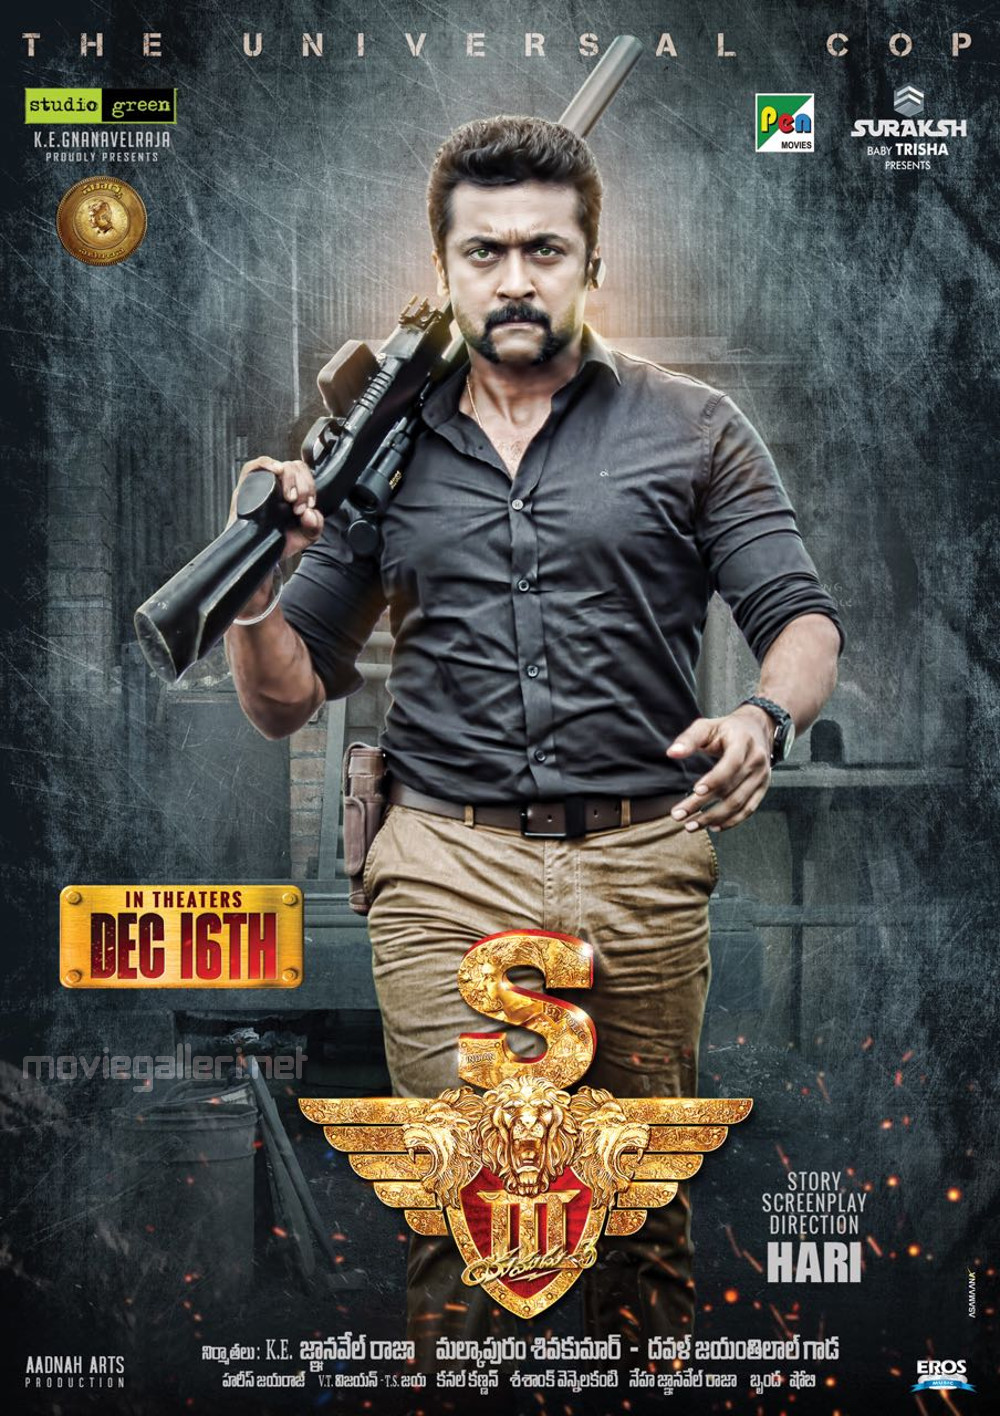 Surya's S3 Release Date Dec 16th Poster | New Movie Posters